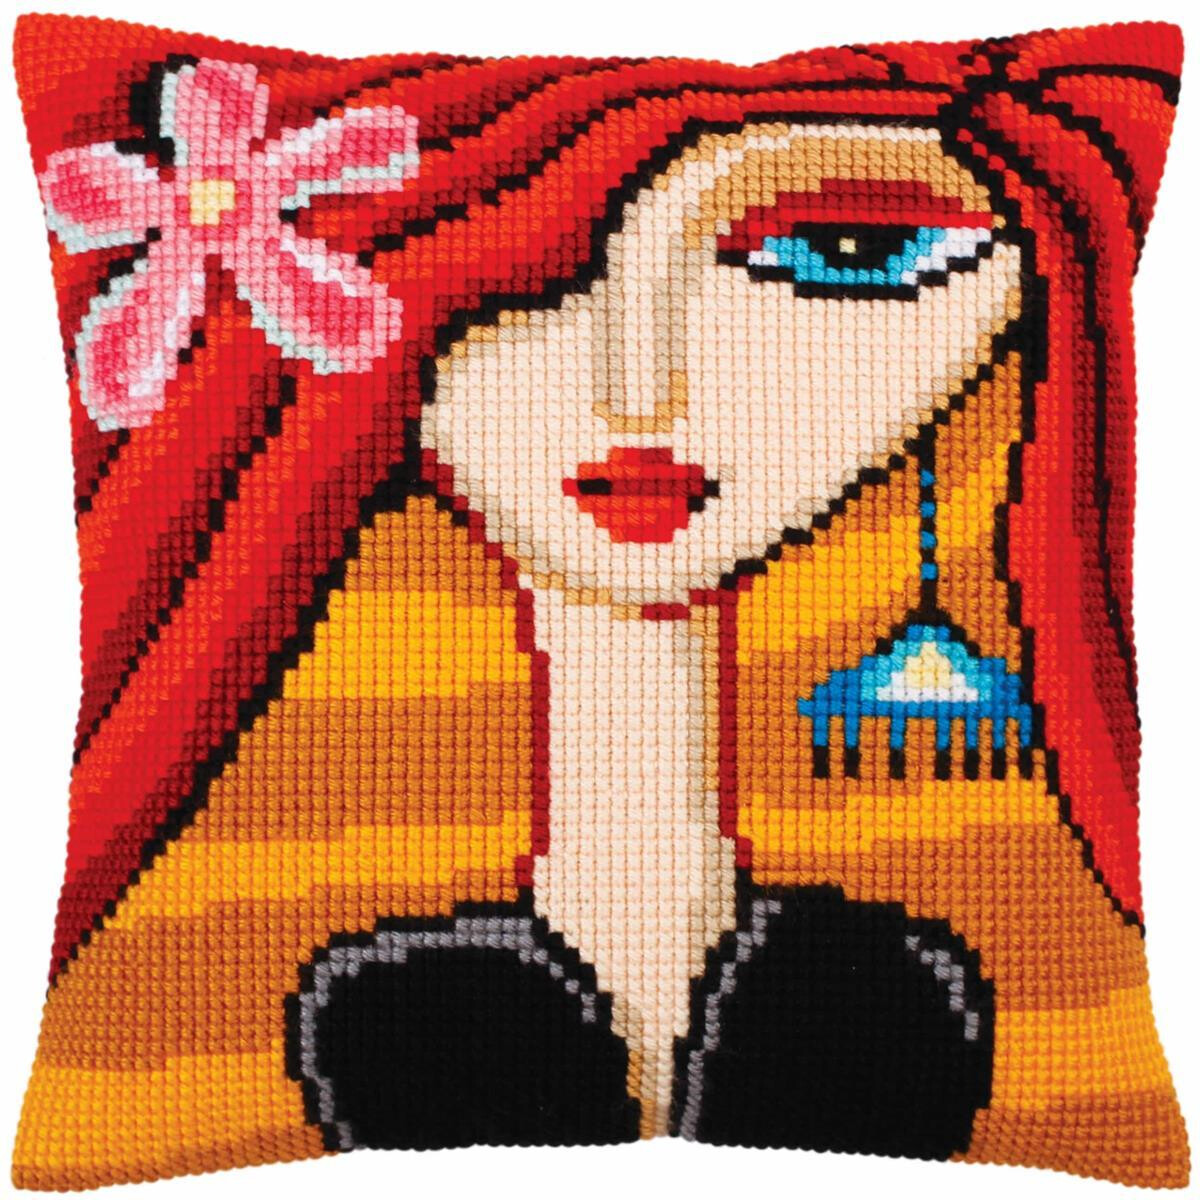 CdA stamped cross stitch kit cushion "Girl with a...